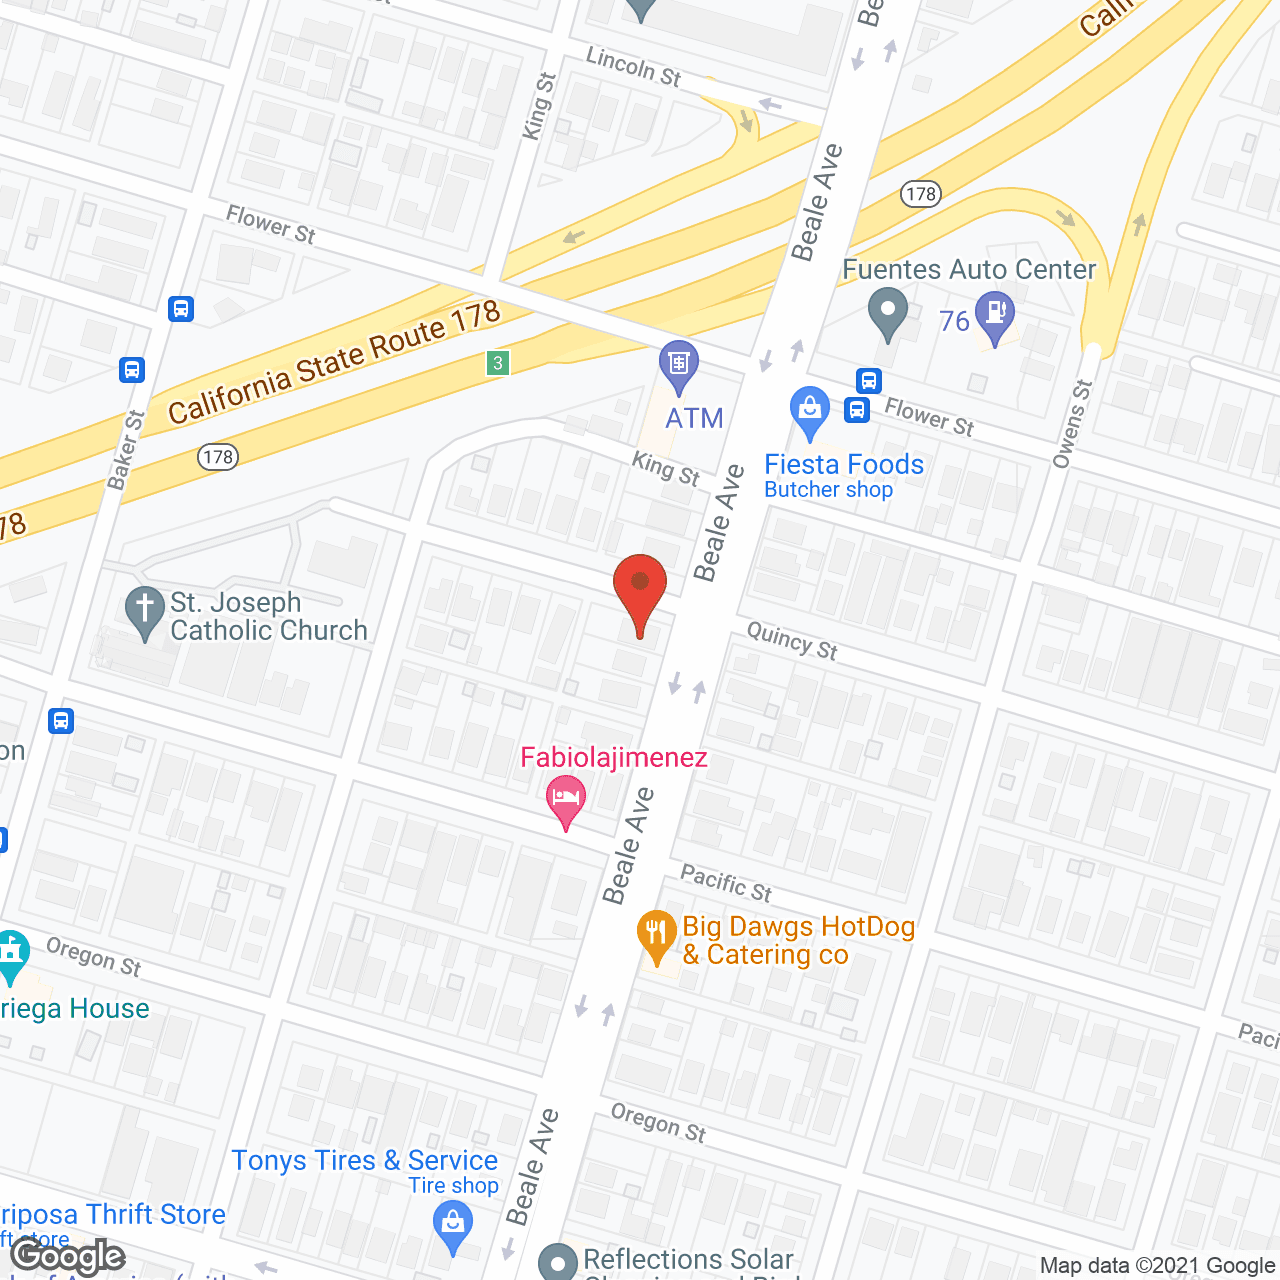 Gracious Lady Alzheimer Care in google map